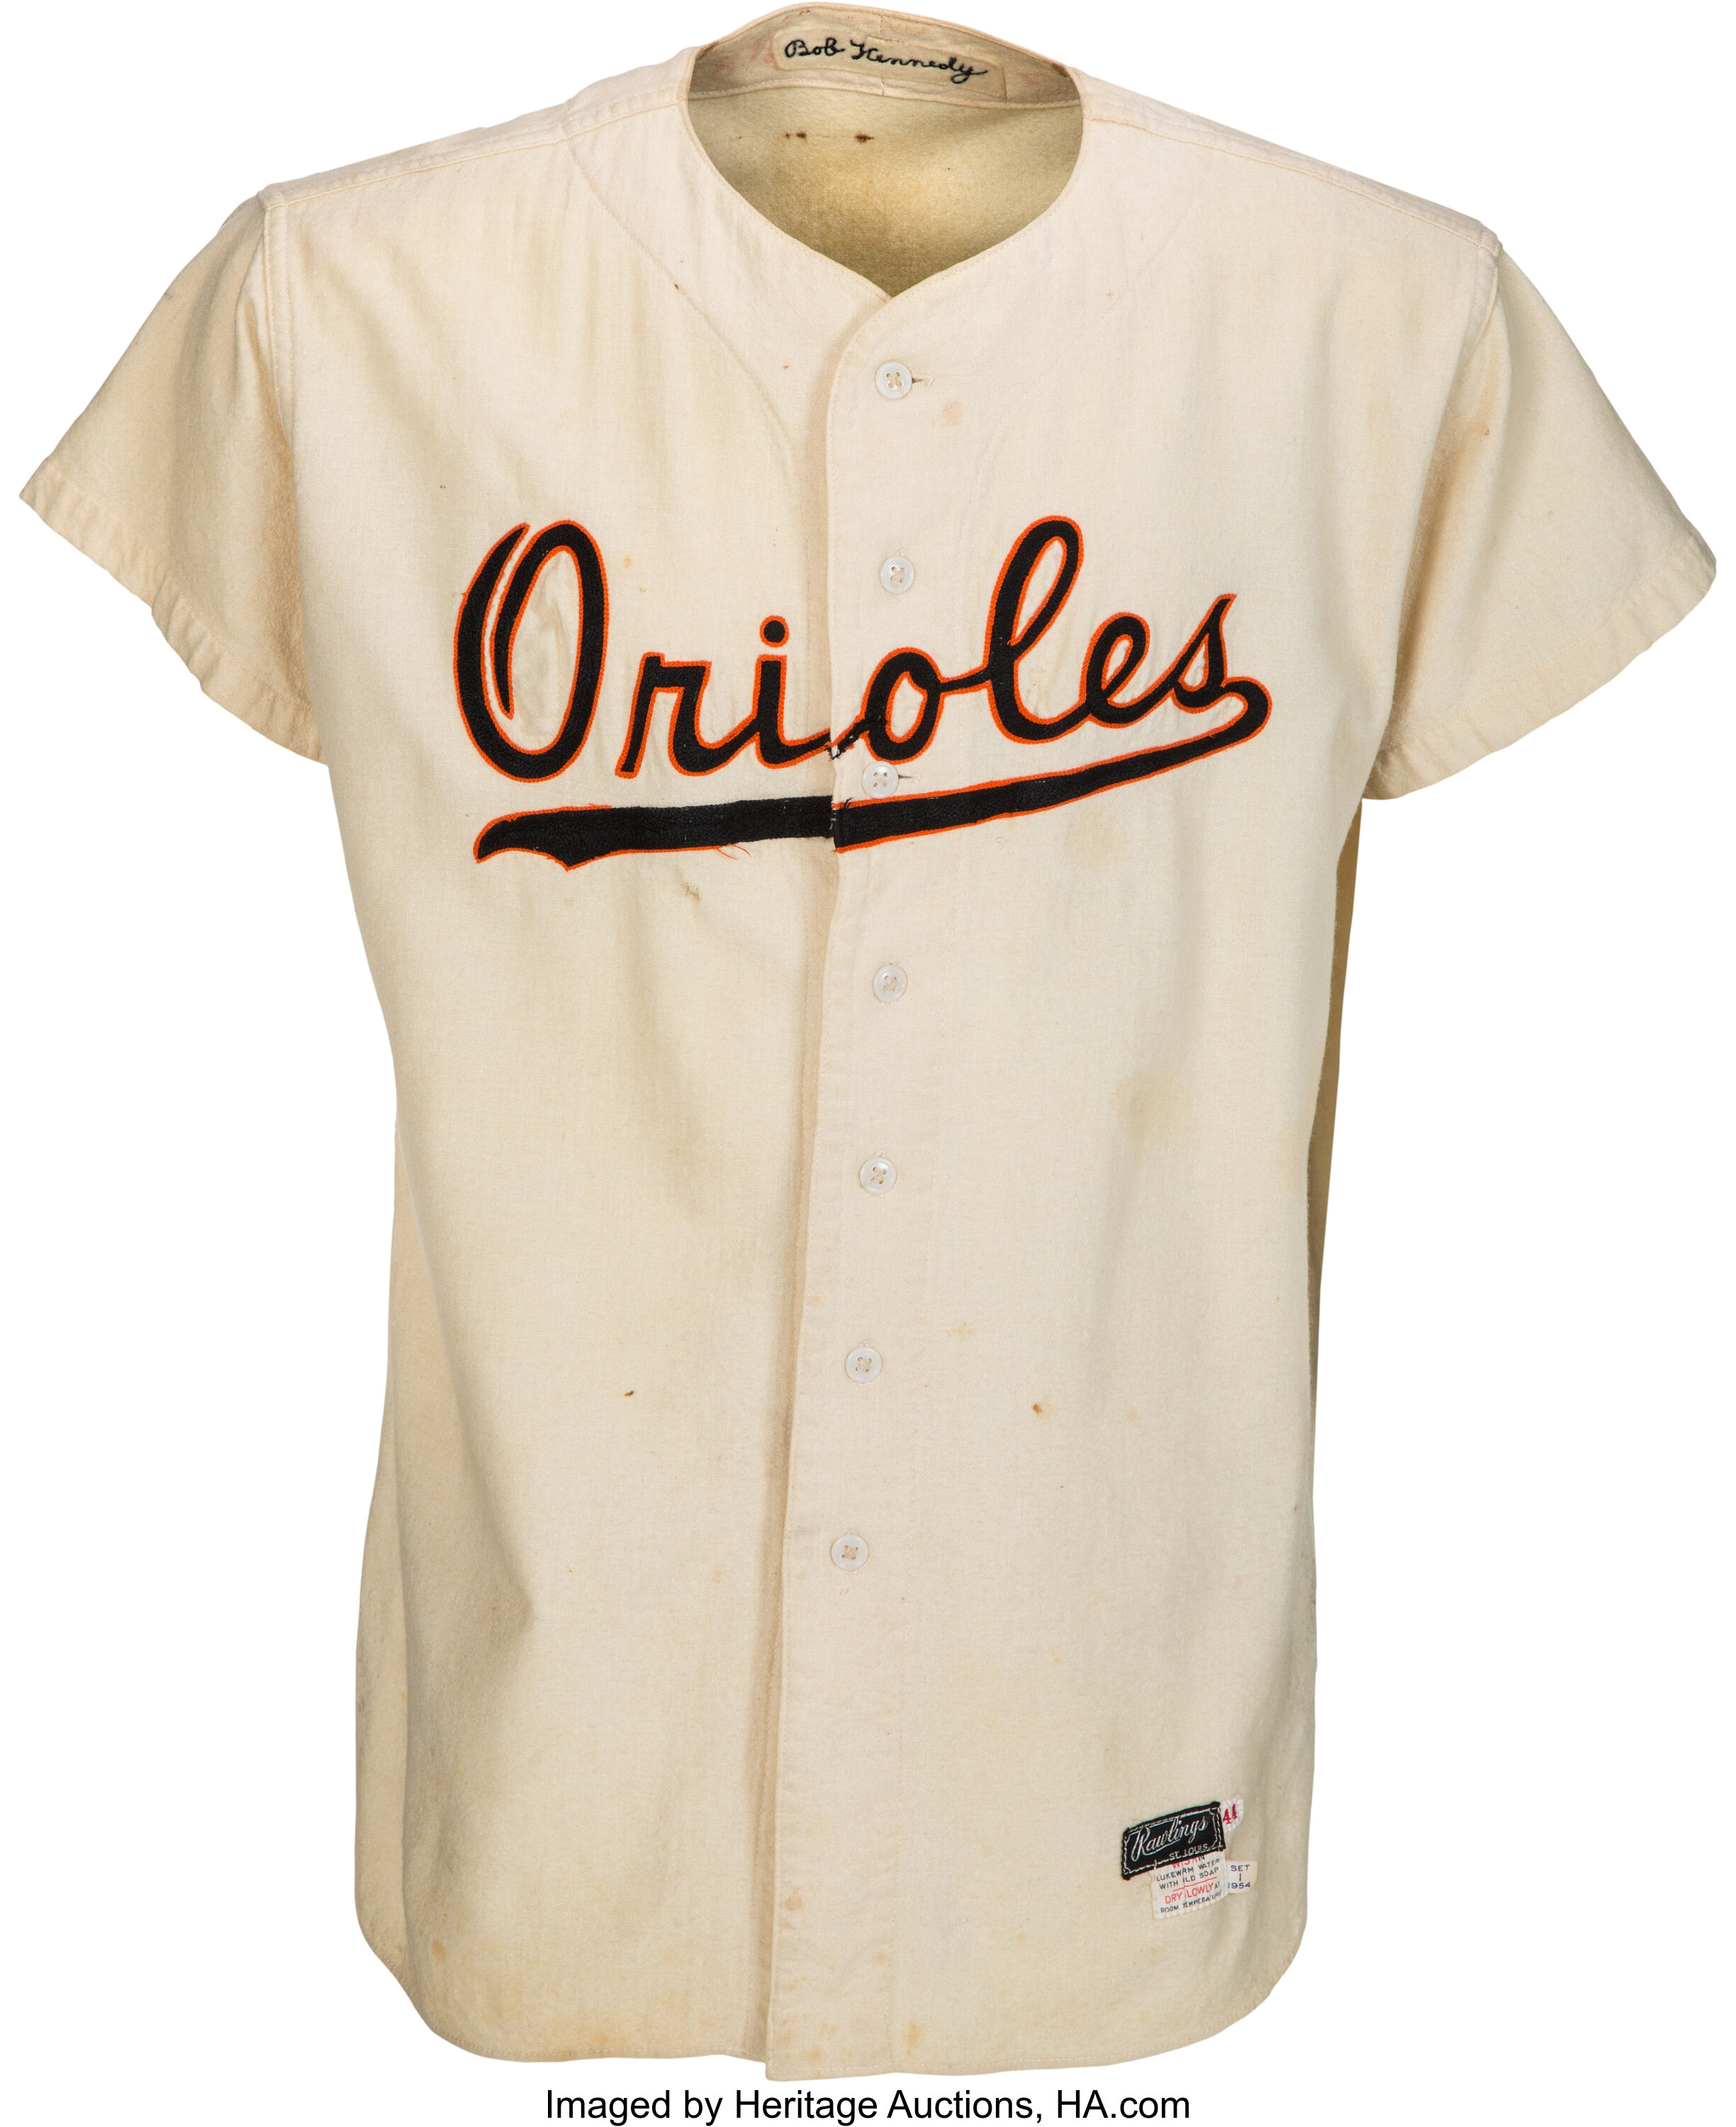 Orioles wearing throwback uniforms